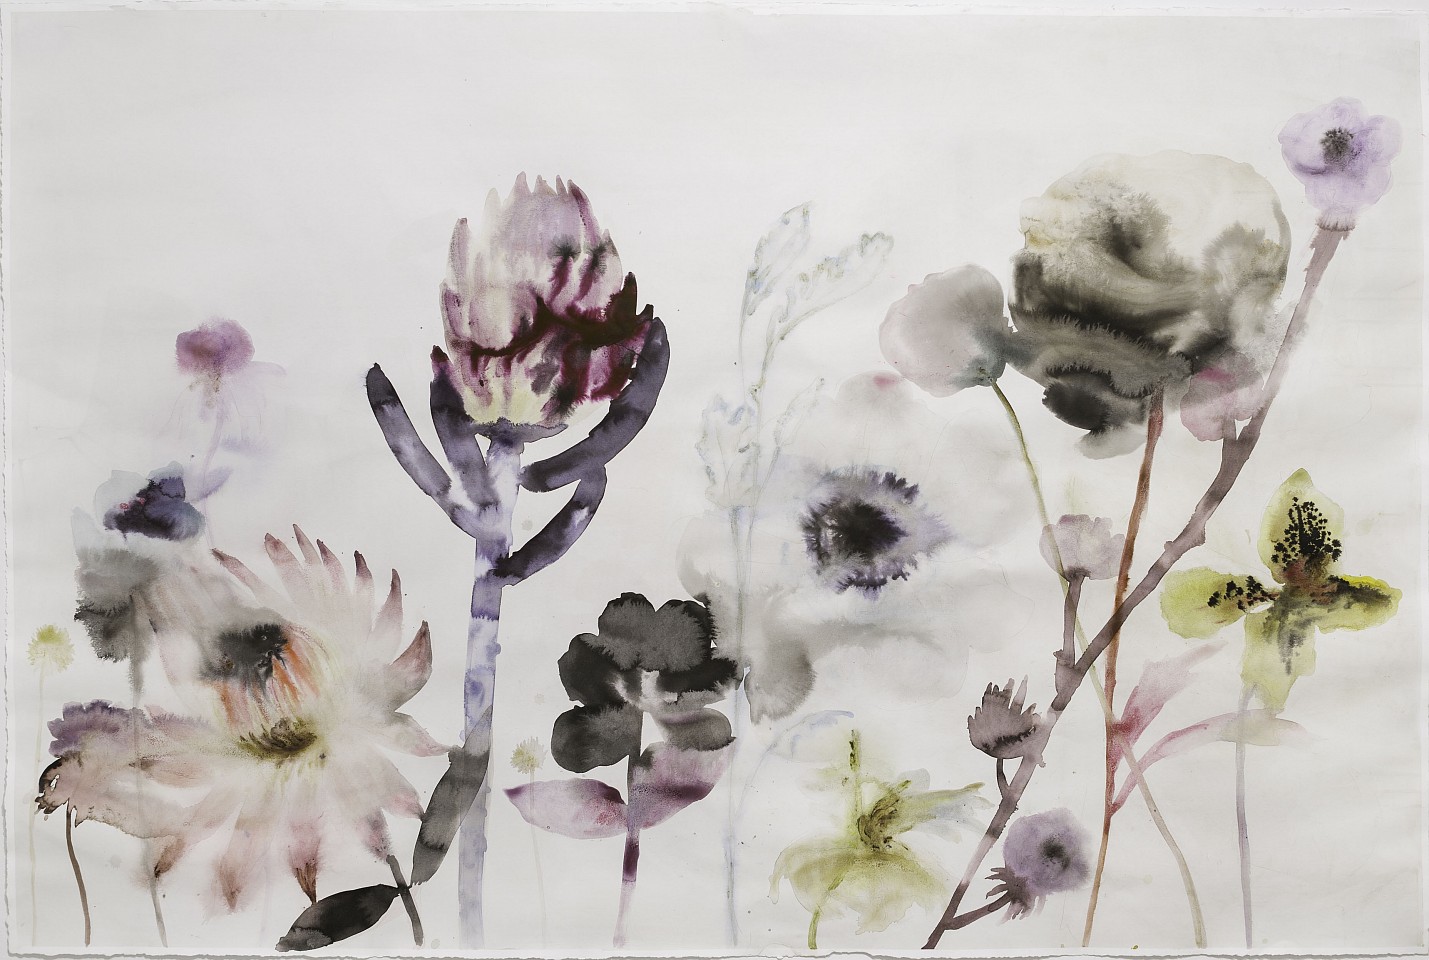 Lourdes Sanchez (Watercolor)
Untitled, 2017
SANCH726
watercolor and mixed media on paper, 44 x 64 inches framed